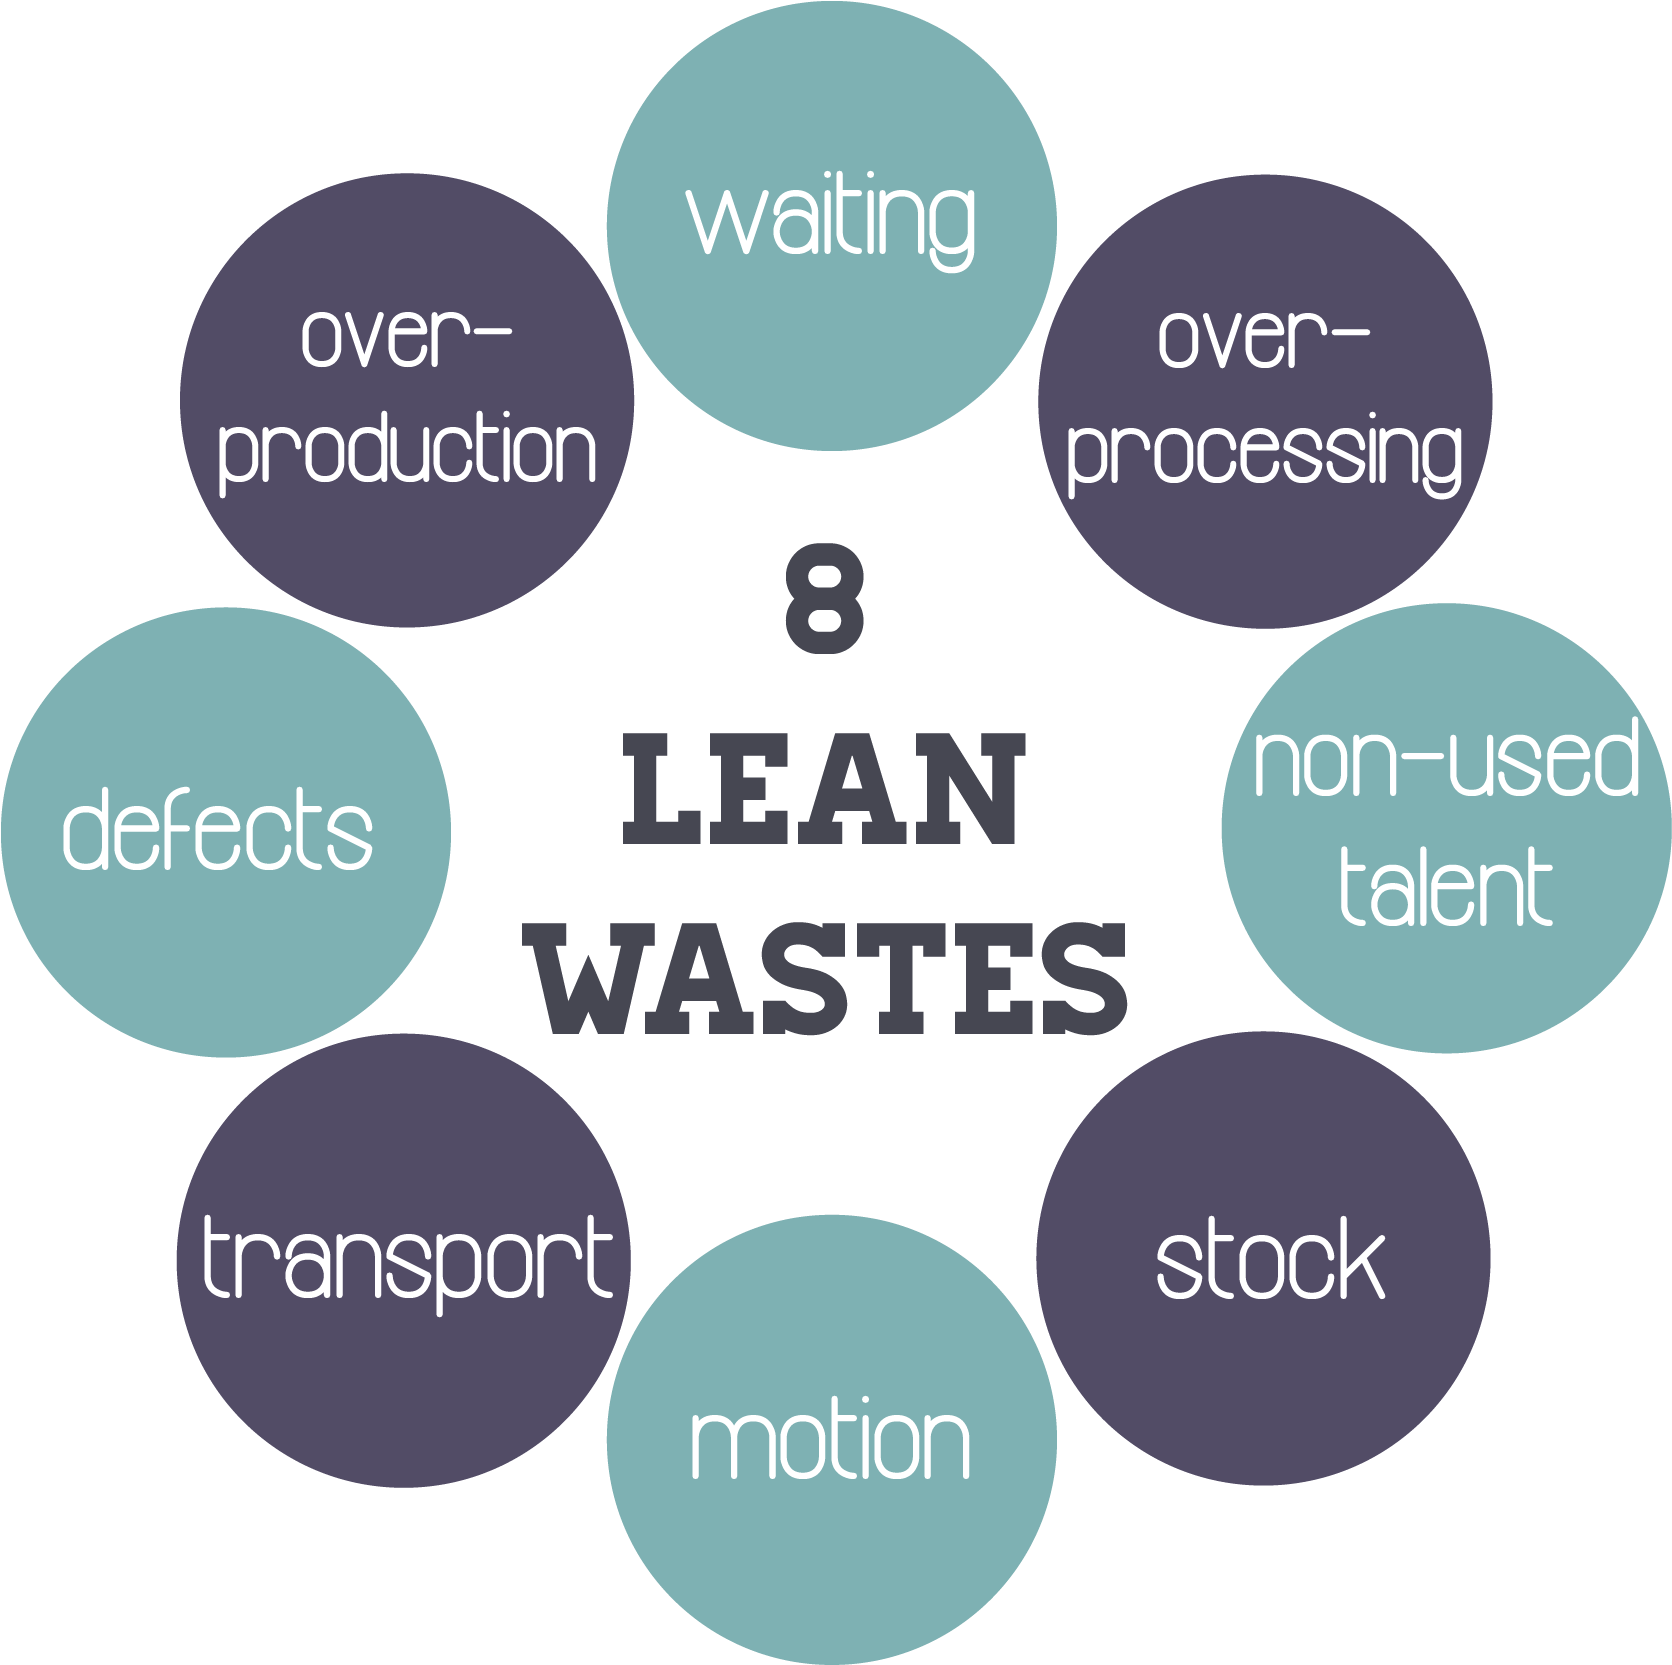 Picture of 8 lean wastes, waiting, over-processing, non-used talent, stock, motion, transport, defects, over-production, waiting